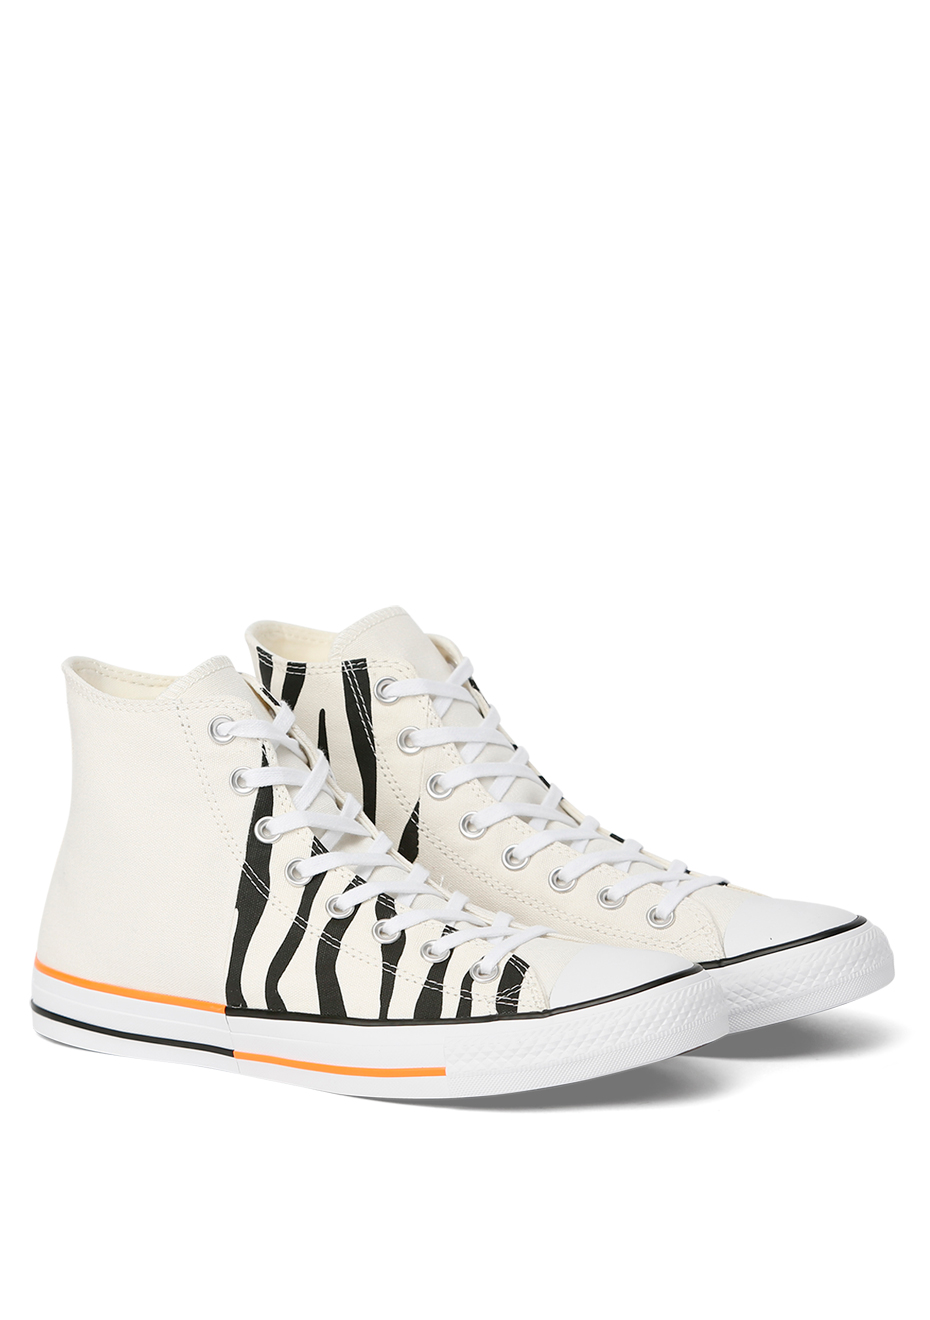 converse total white horse